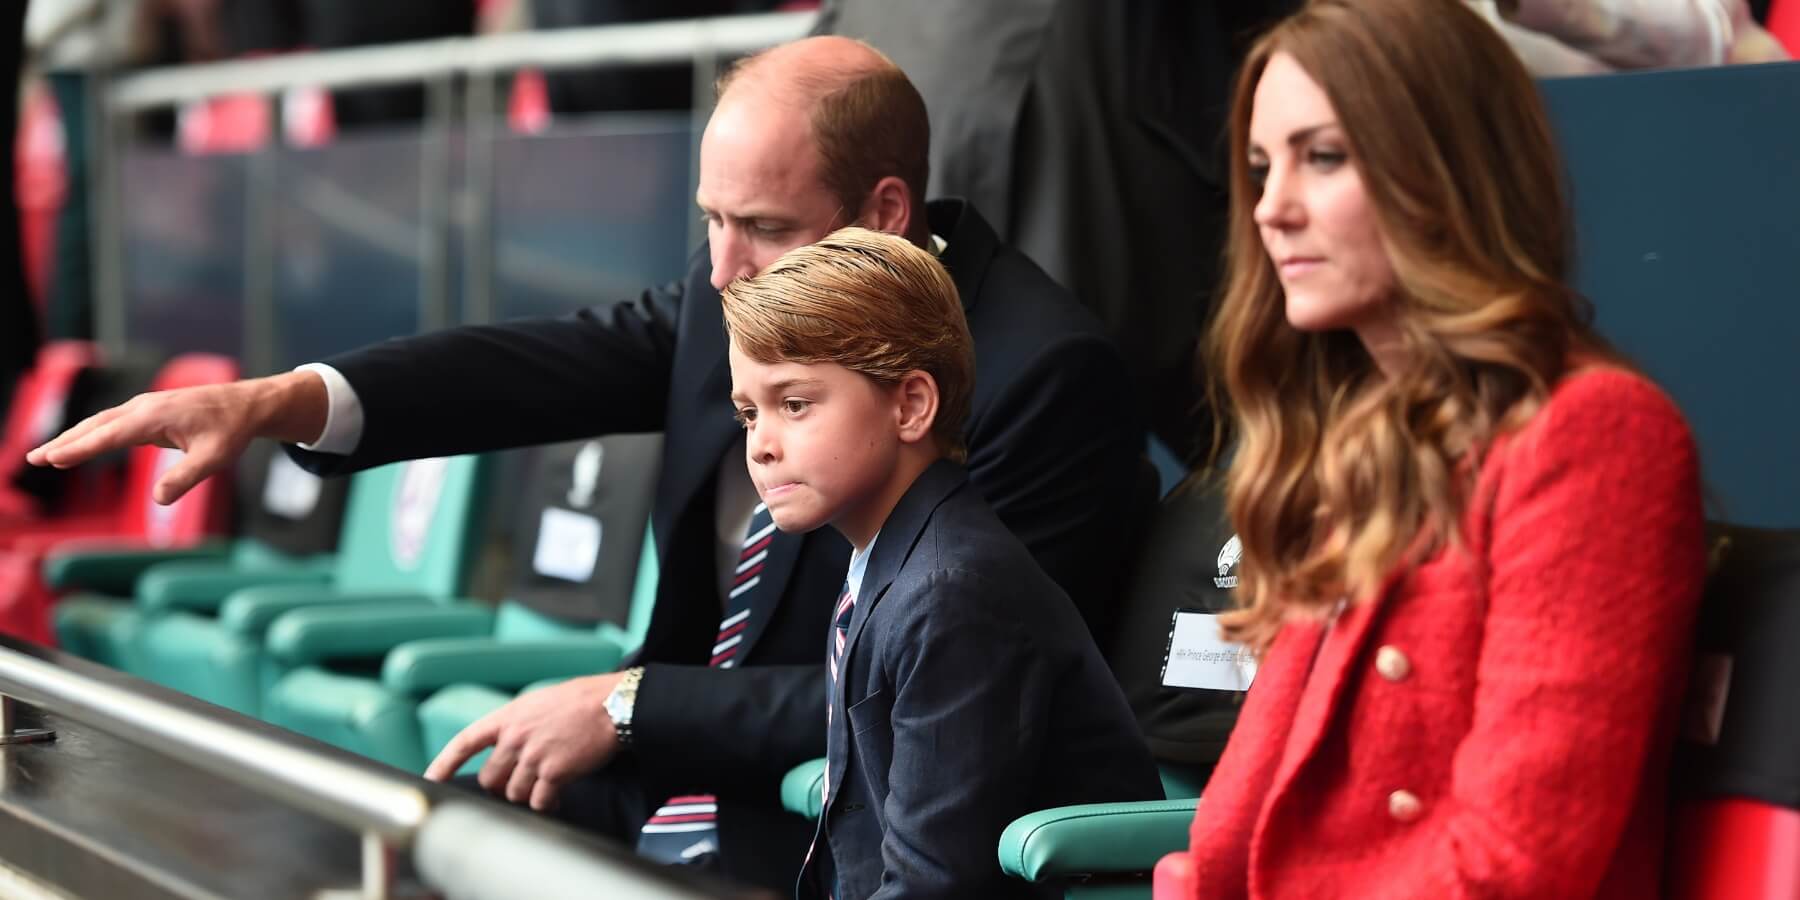 Prince William, Prince George, and Kate Middleton at a football match on June 29, 2021 in London, England.